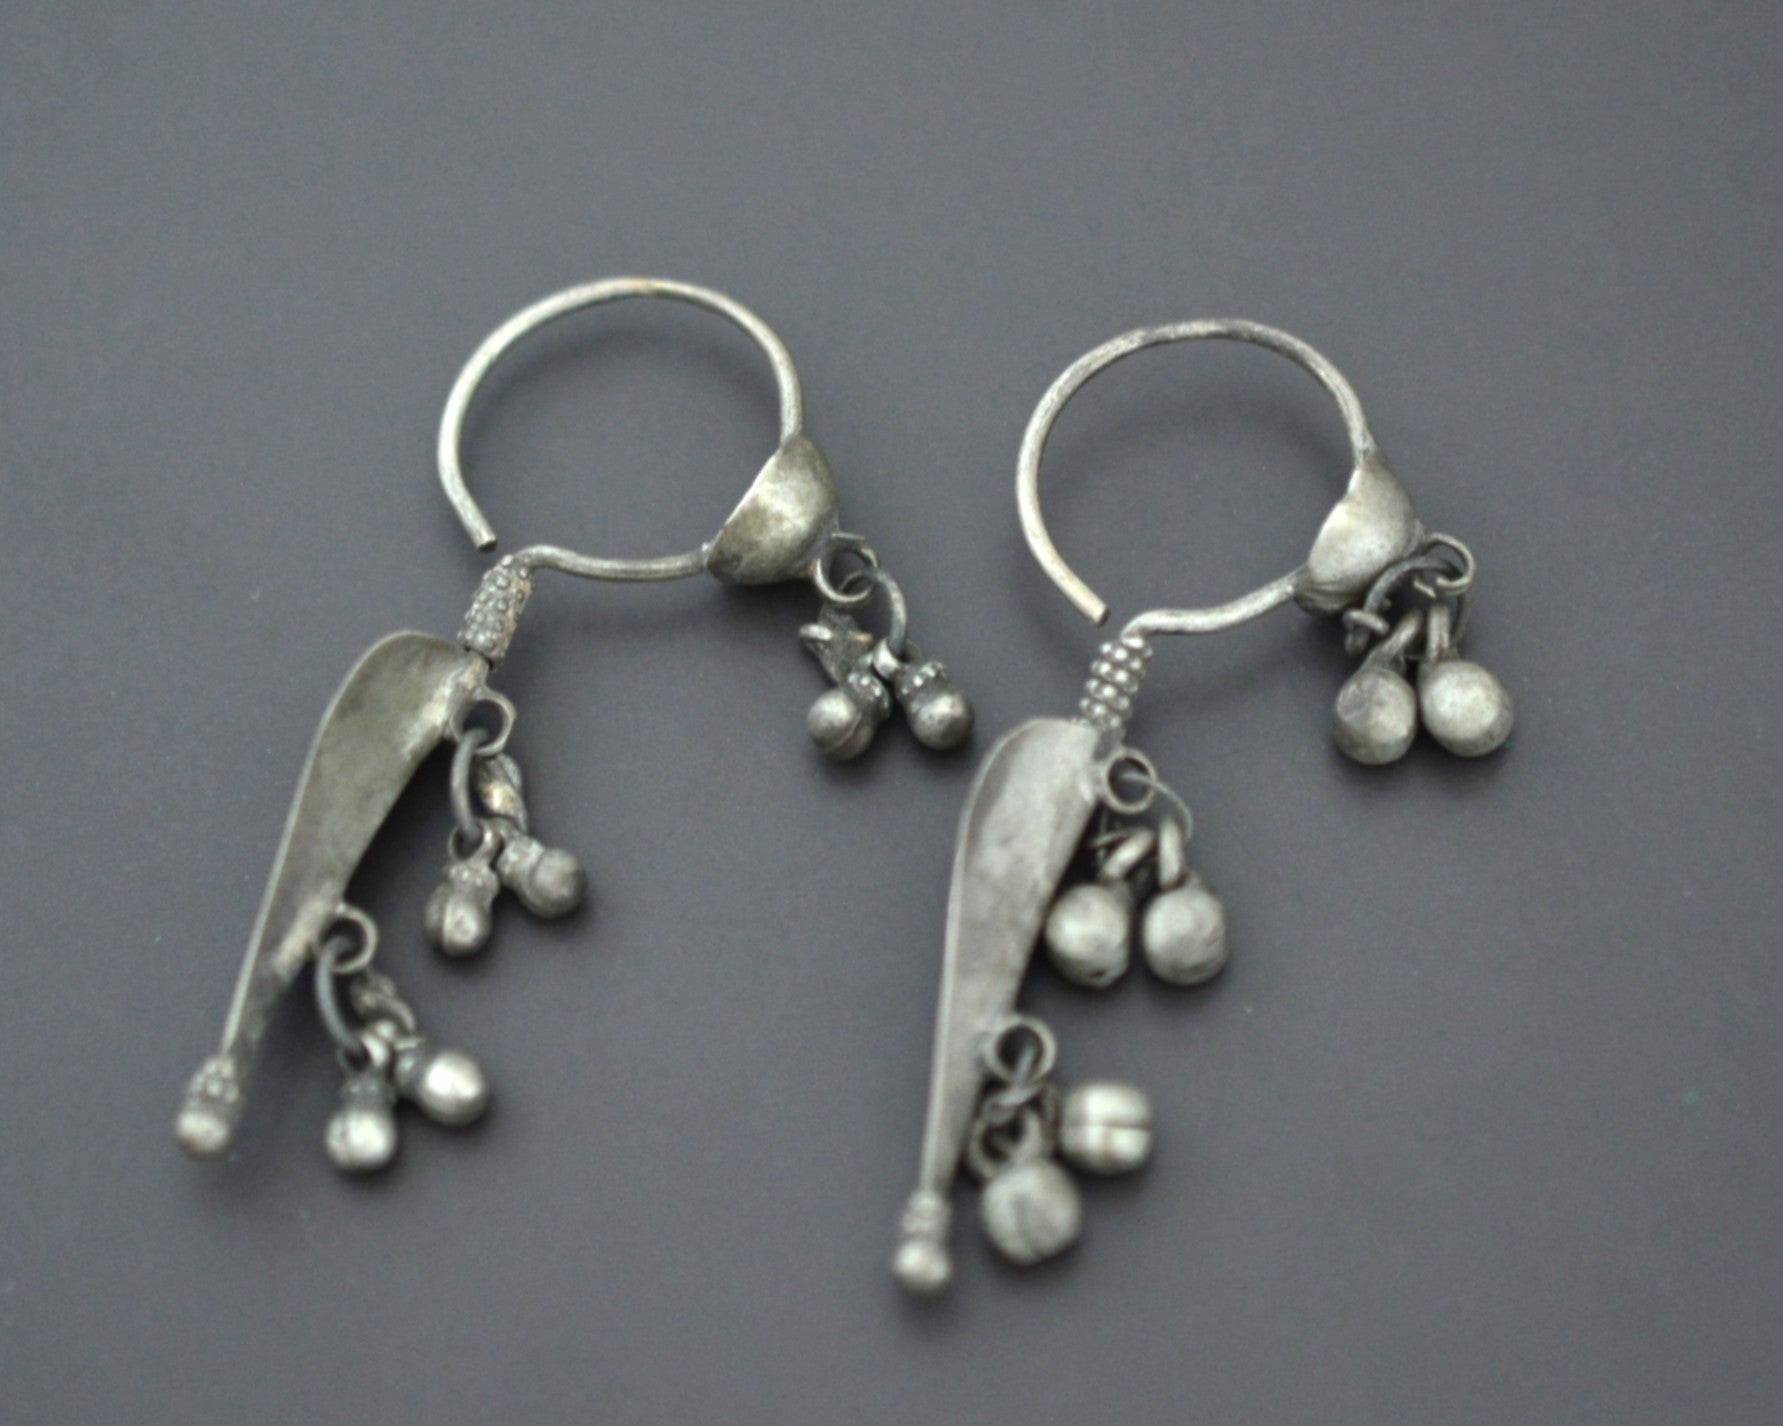 Old Rajasthani Silver Earrings with Bells